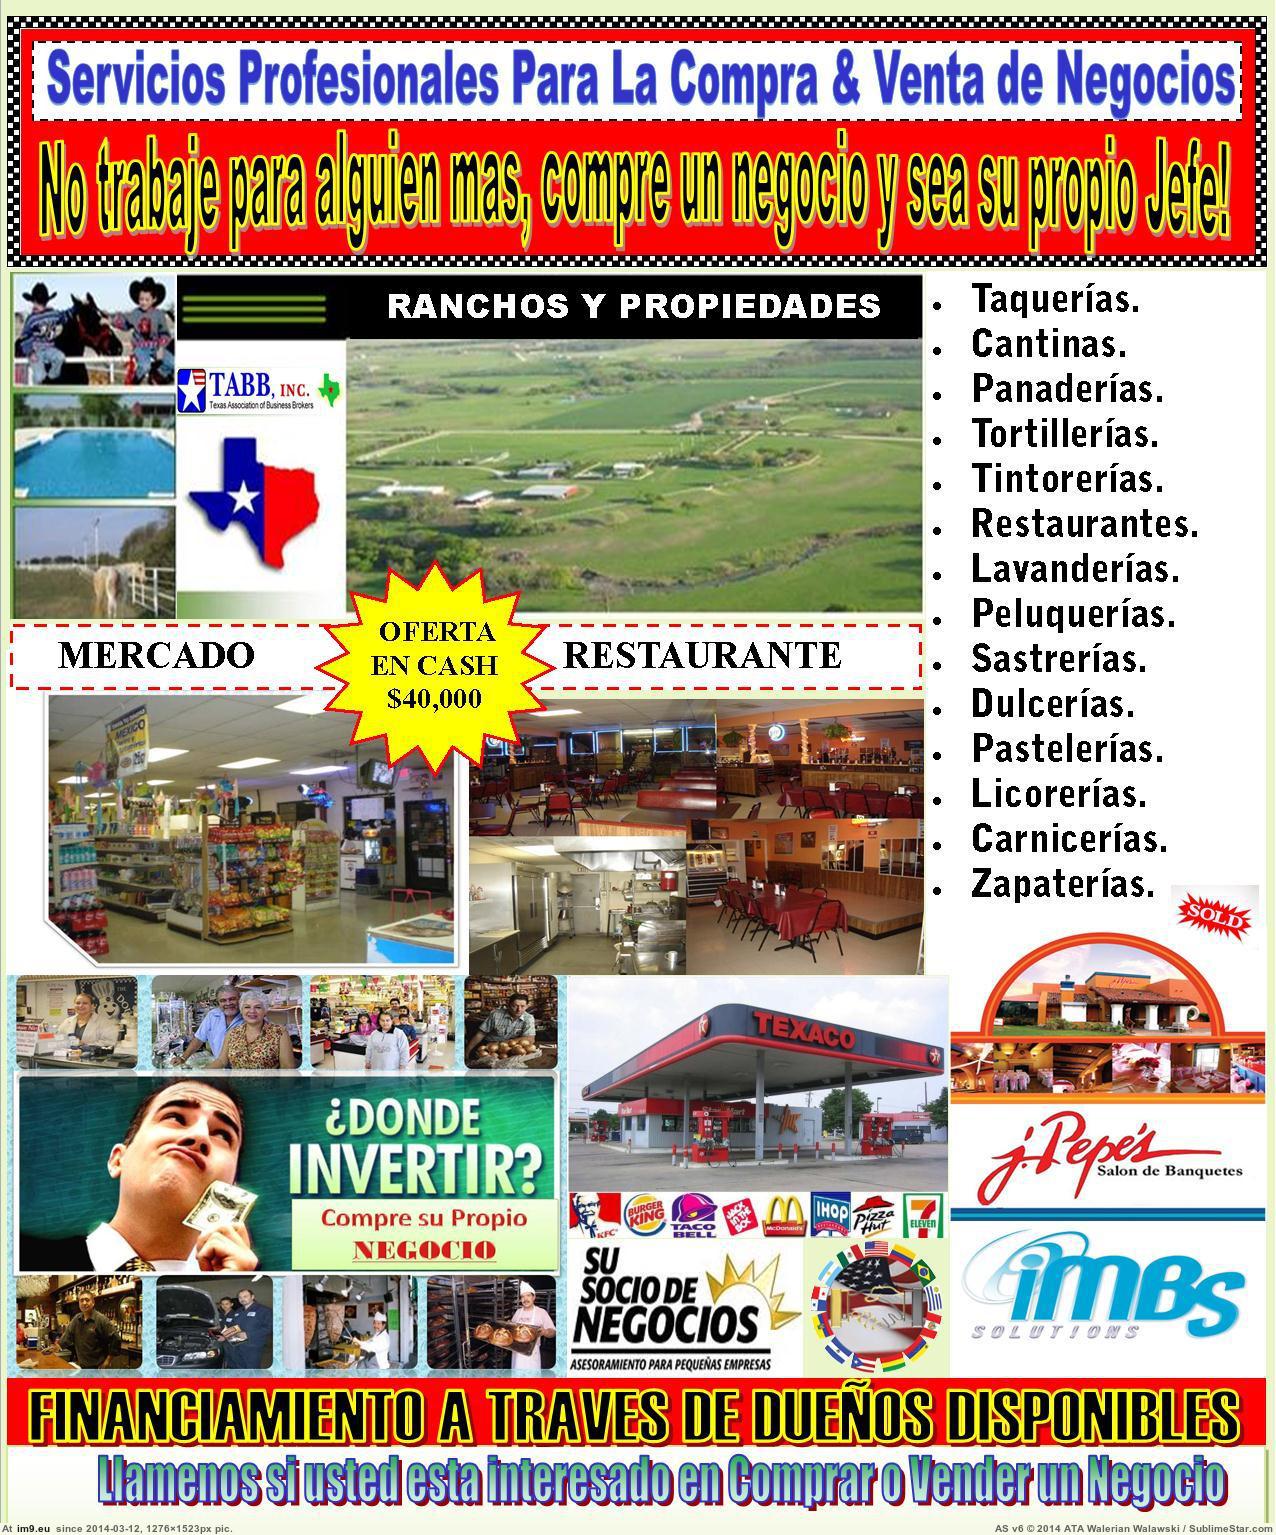 IMBS Comercializadora USA (in IMBS Business For Sale)